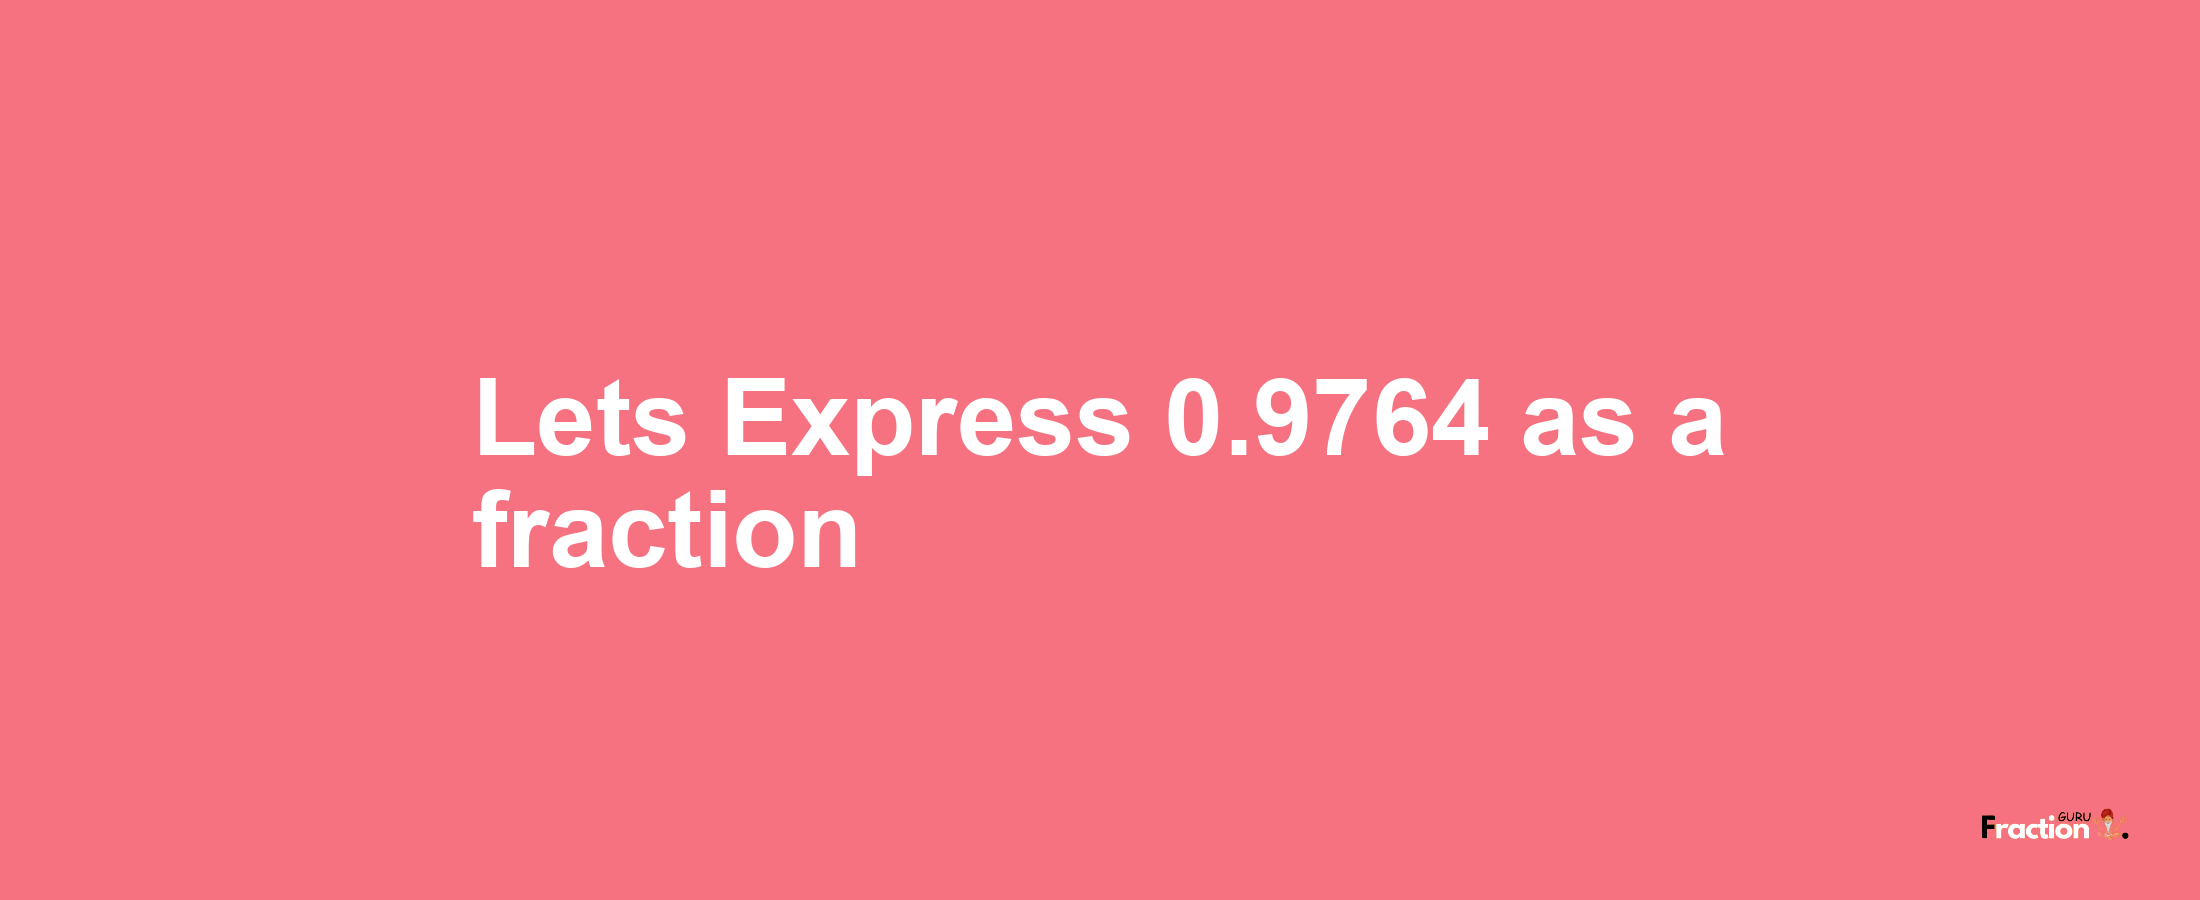 Lets Express 0.9764 as afraction